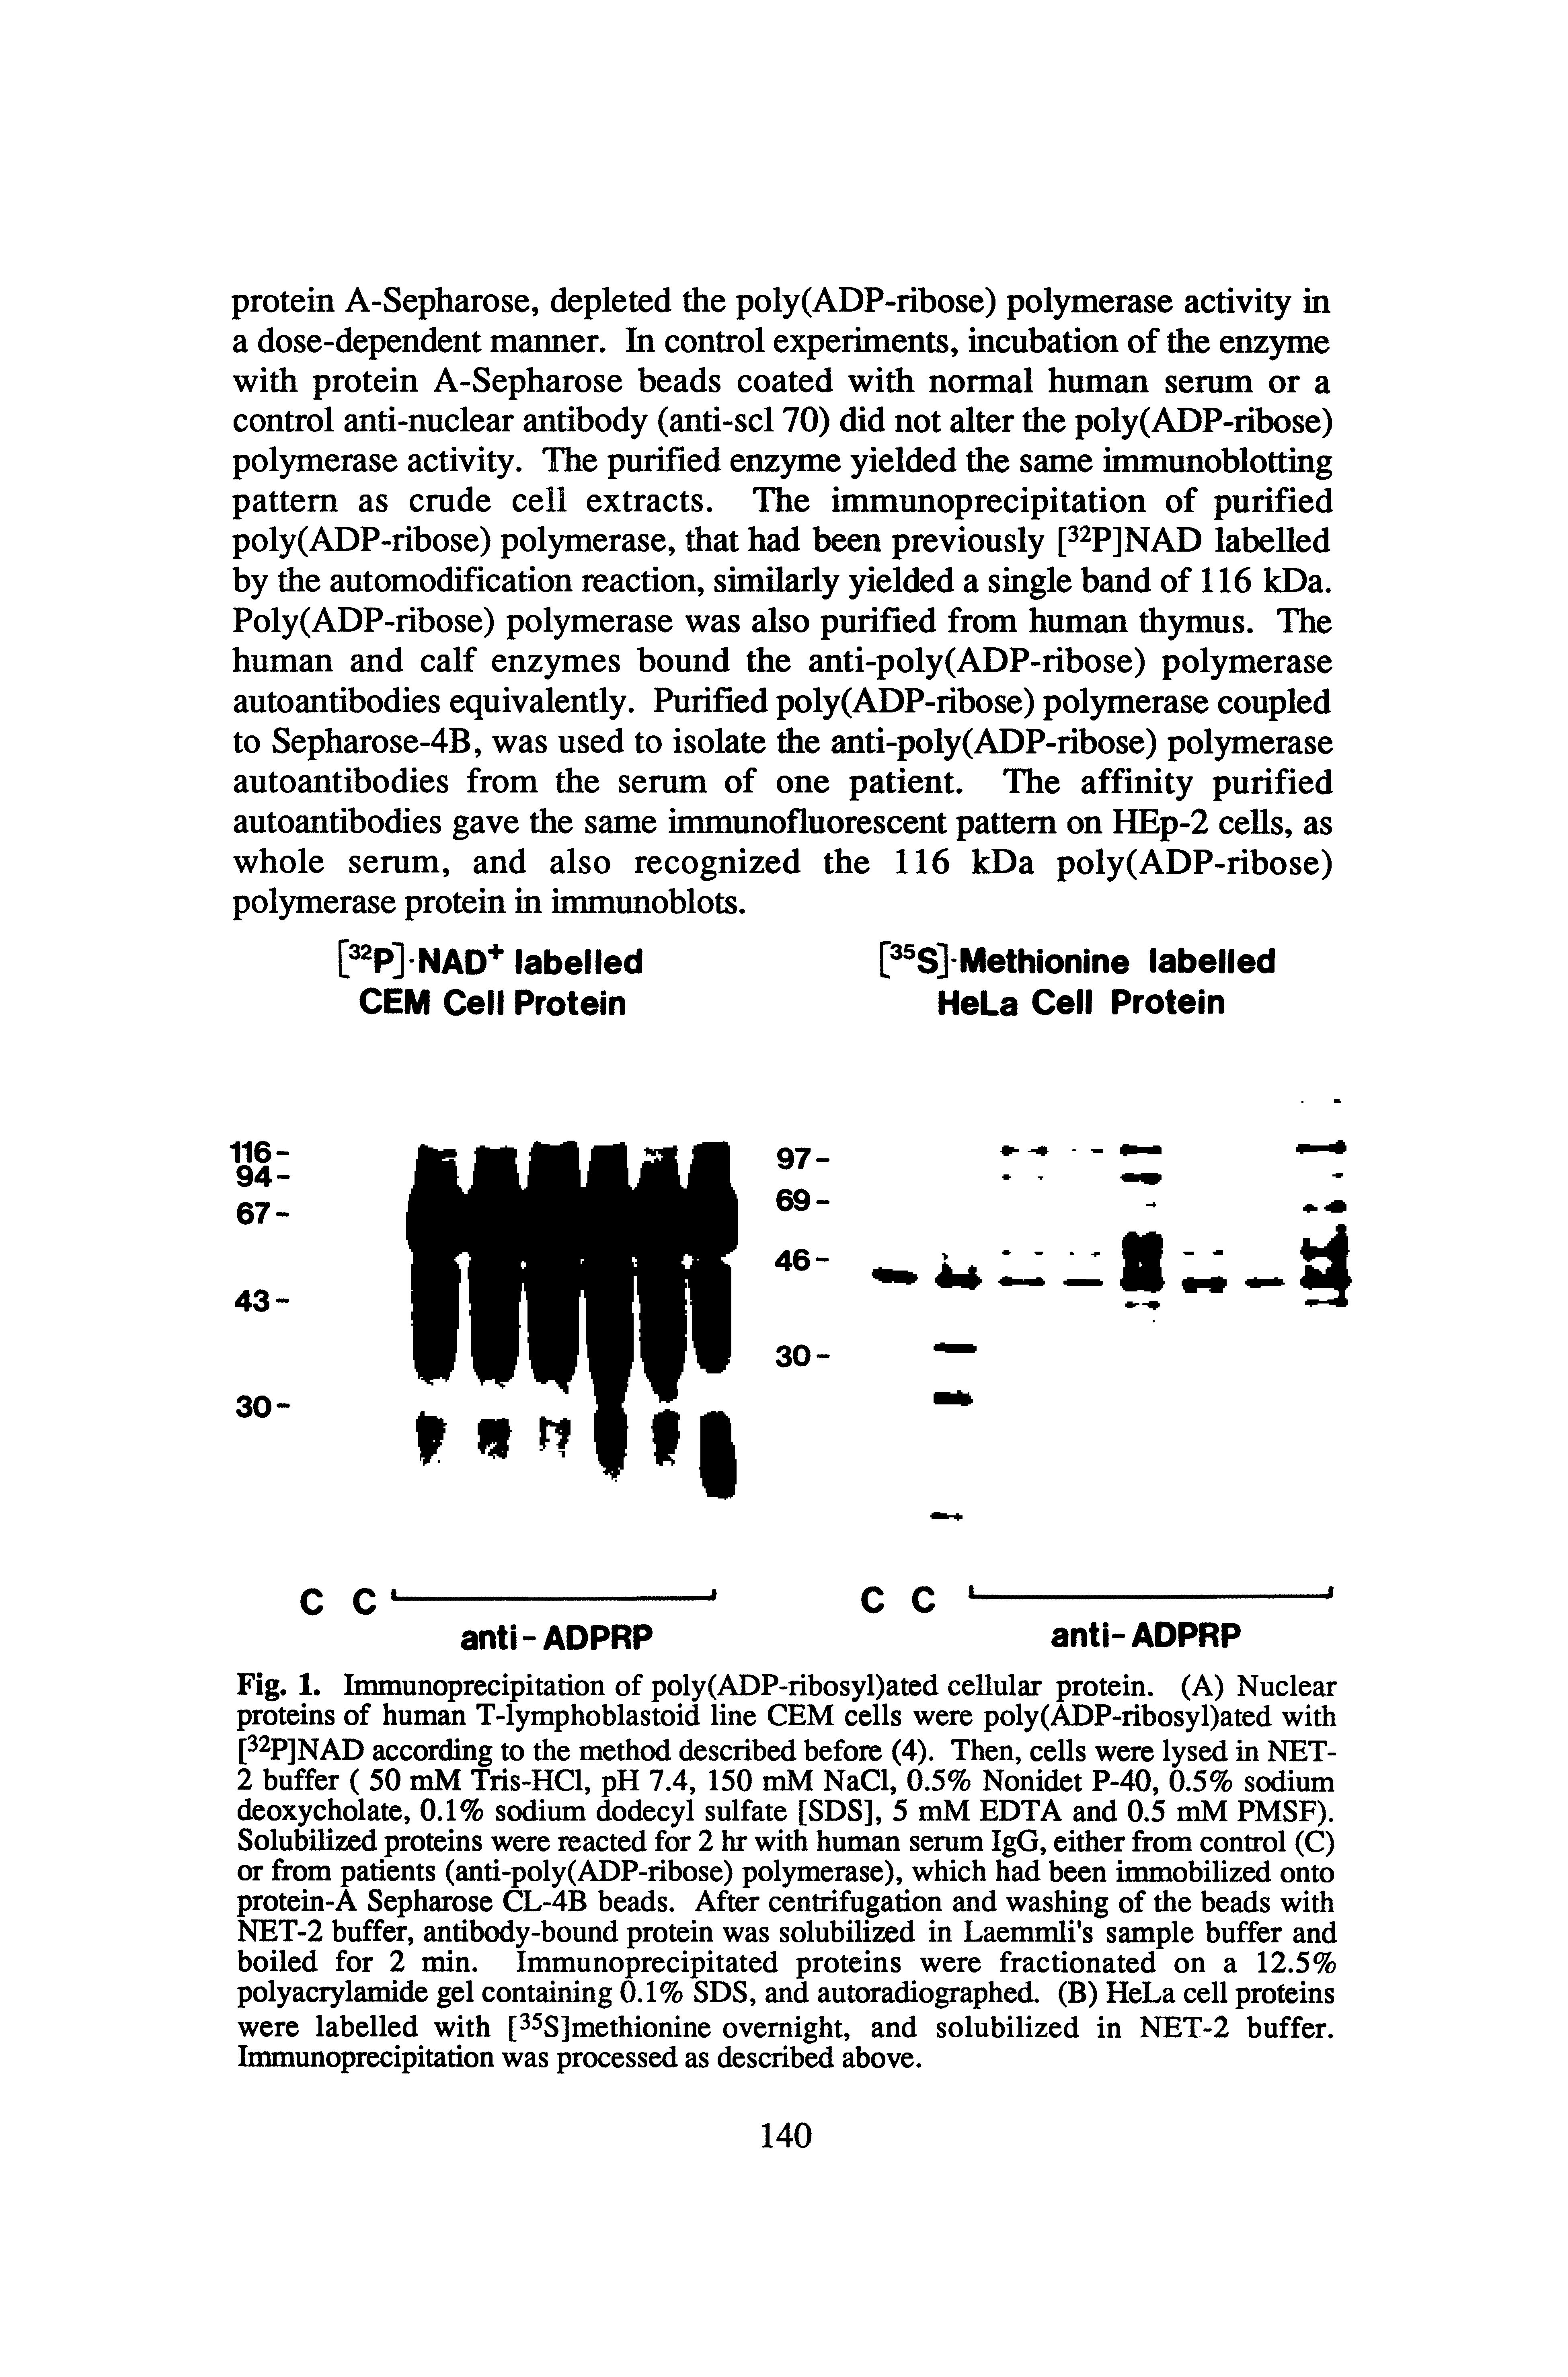 Fig. 1. Immunoprecipitation of poly(ADP-ribosyl)ated cellular protein. (A) Nuclear proteins of human T-lymphoblastoid line CEM cells were poly(ADP-ribosyl)ated with [32p]NAD according to the method described before (4). Then, cells were lysed in NET-2 buffer ( 50 mM Tris-HCl, pH 7.4, 150 mM NaCl, 0.5% Nonidet P-40, 0.5% sodium deoxycholate, 0.1% sodium dodecyl sulfate [SDS], 5 mM EDTA and 0.5 mM PMSF). Solubilized proteins were reacted for 2 hr with human serum IgG, either from control (C) or from patients (anti-poly(ADP-ribose) polymerase), which had been immobilized onto protein-A Sepharose CL-4B beads. After centrifugation and washing of the beads with NET-2 buffer, antibody-bound protein was solubilized in Laemmli s sample buffer and boiled for 2 min. Immunoprecipitated proteins were fractionated on a 12.5% polyacrylamide gel containing 0.1% SDS, and autoradiographed. (B) HeLa cell proteins were labelled with [ sjmetjiionine overnight, and solubilized in NET-2 buffer. Immunoprecipitation was processed as described above.